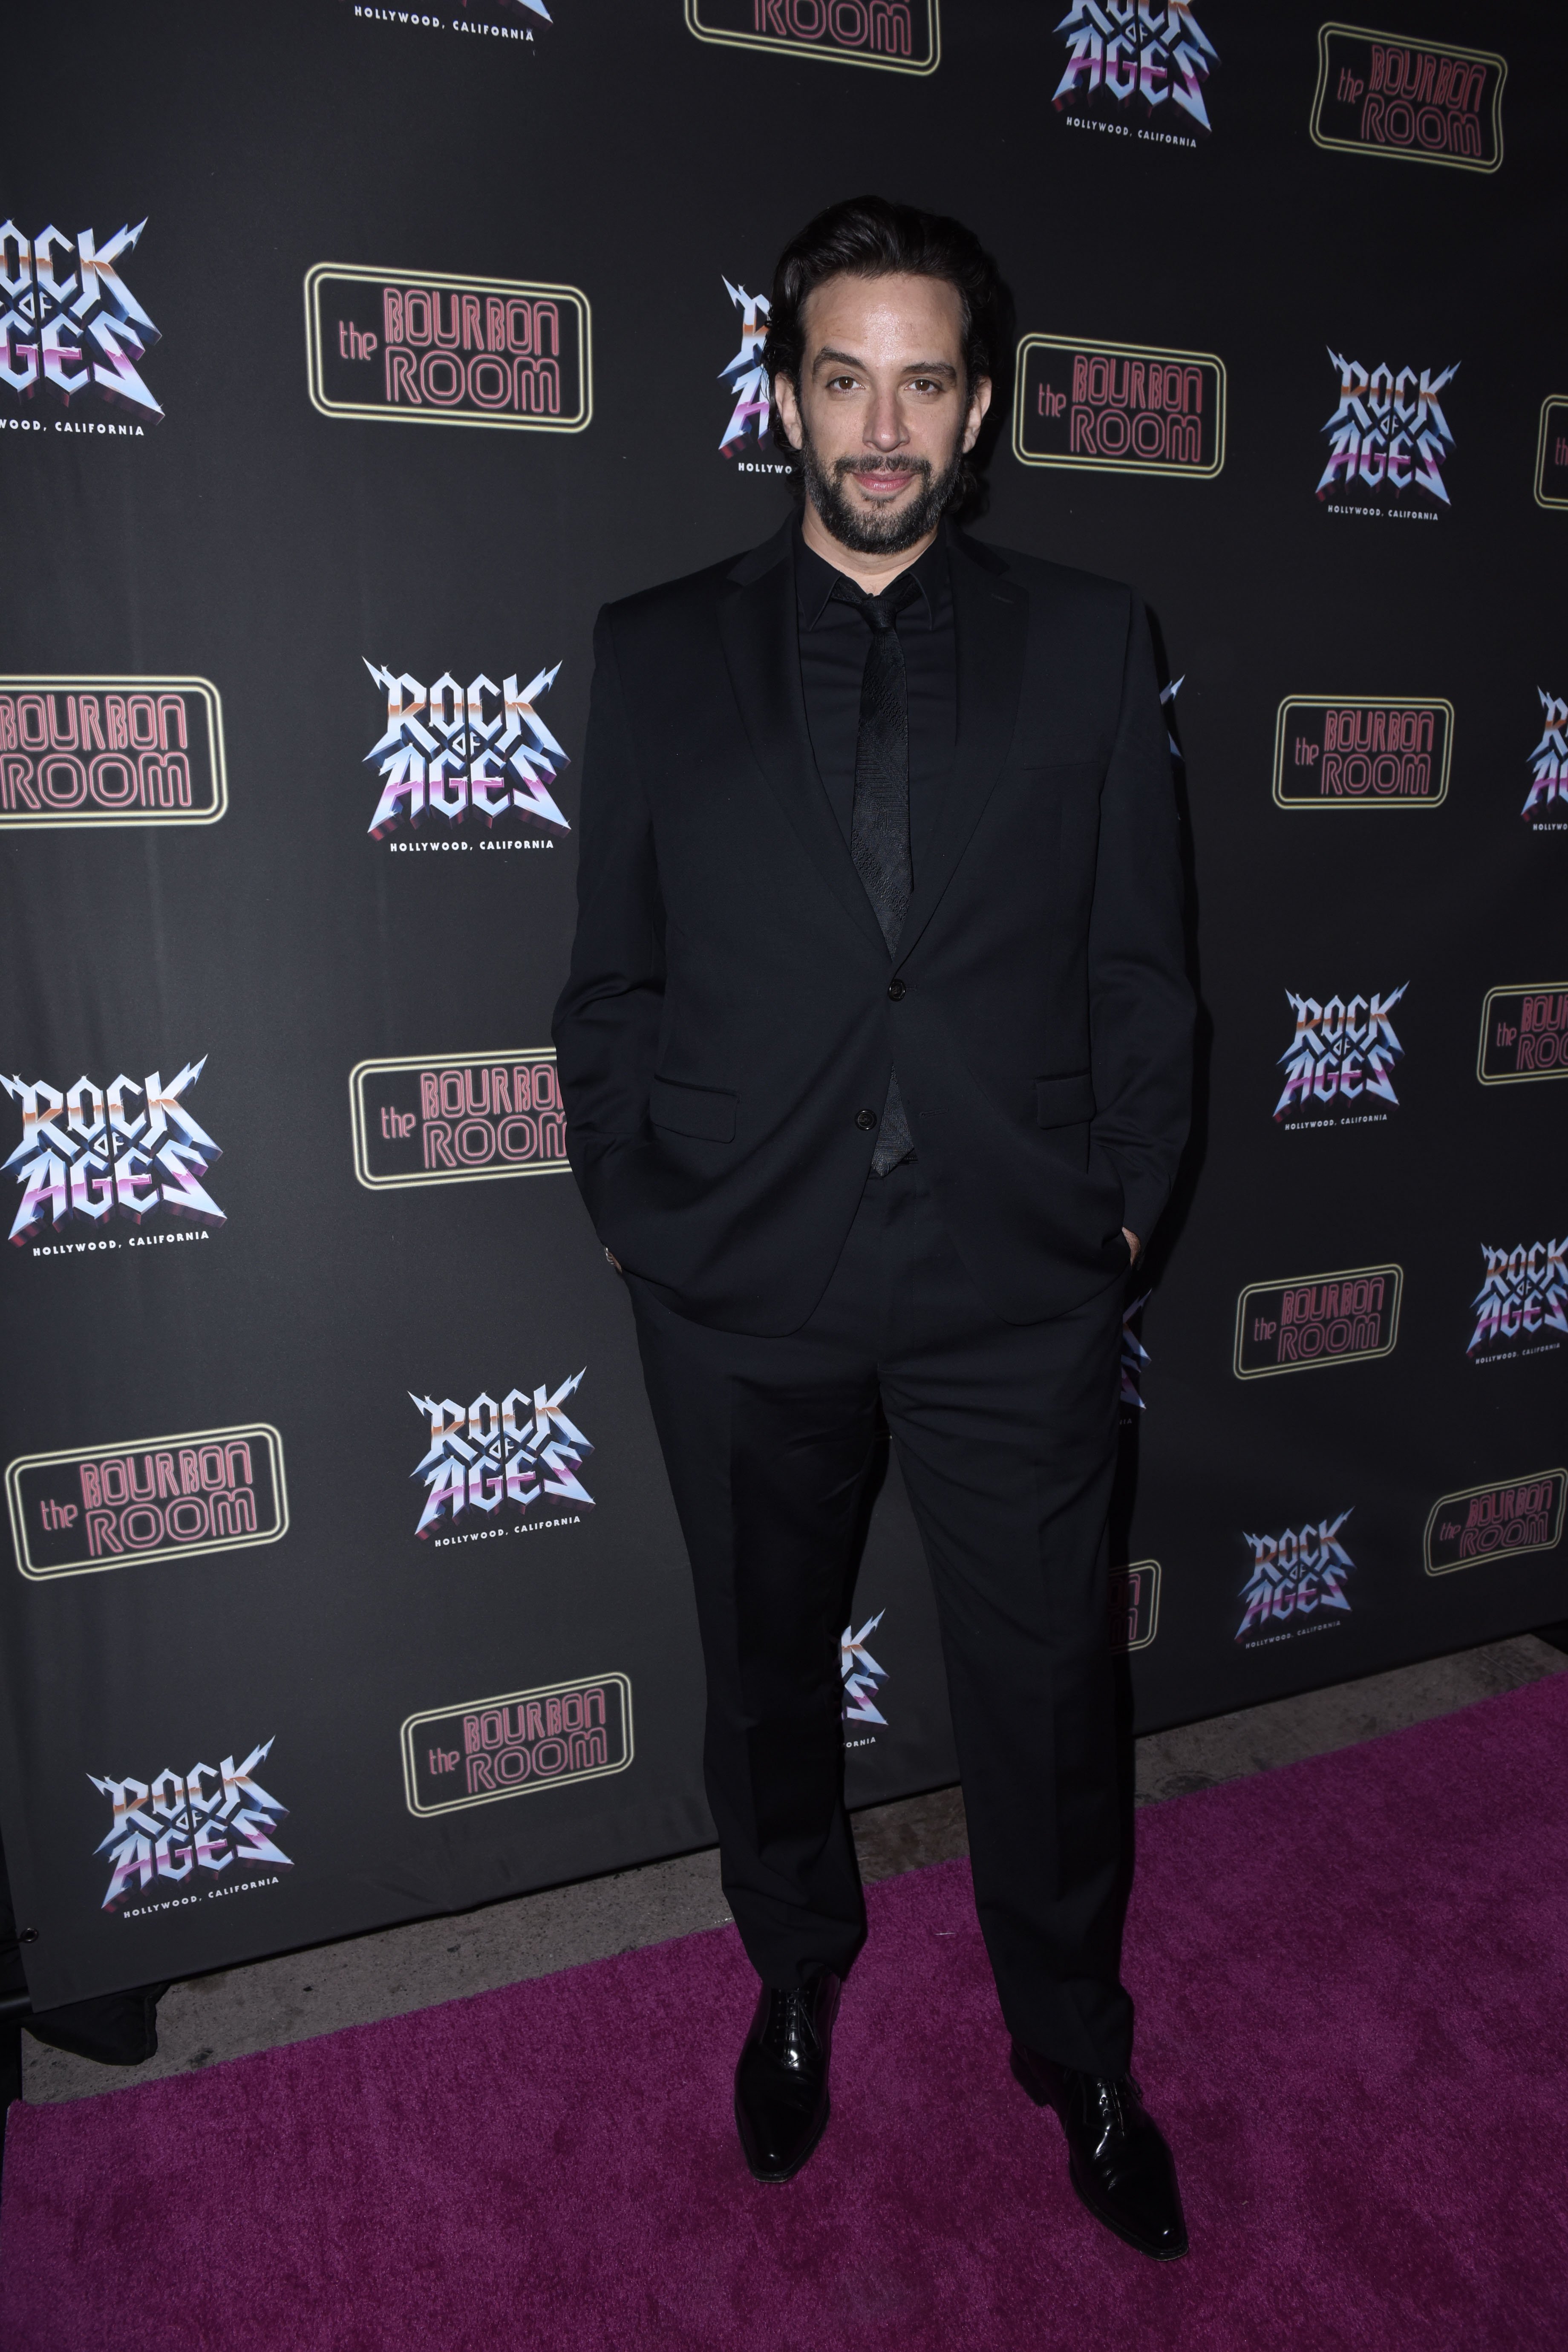 Nick Cordero attends opening night of Rock of Ages Hollywood in Hollywood, California on January 15, 2020 | Photo: Getty Images